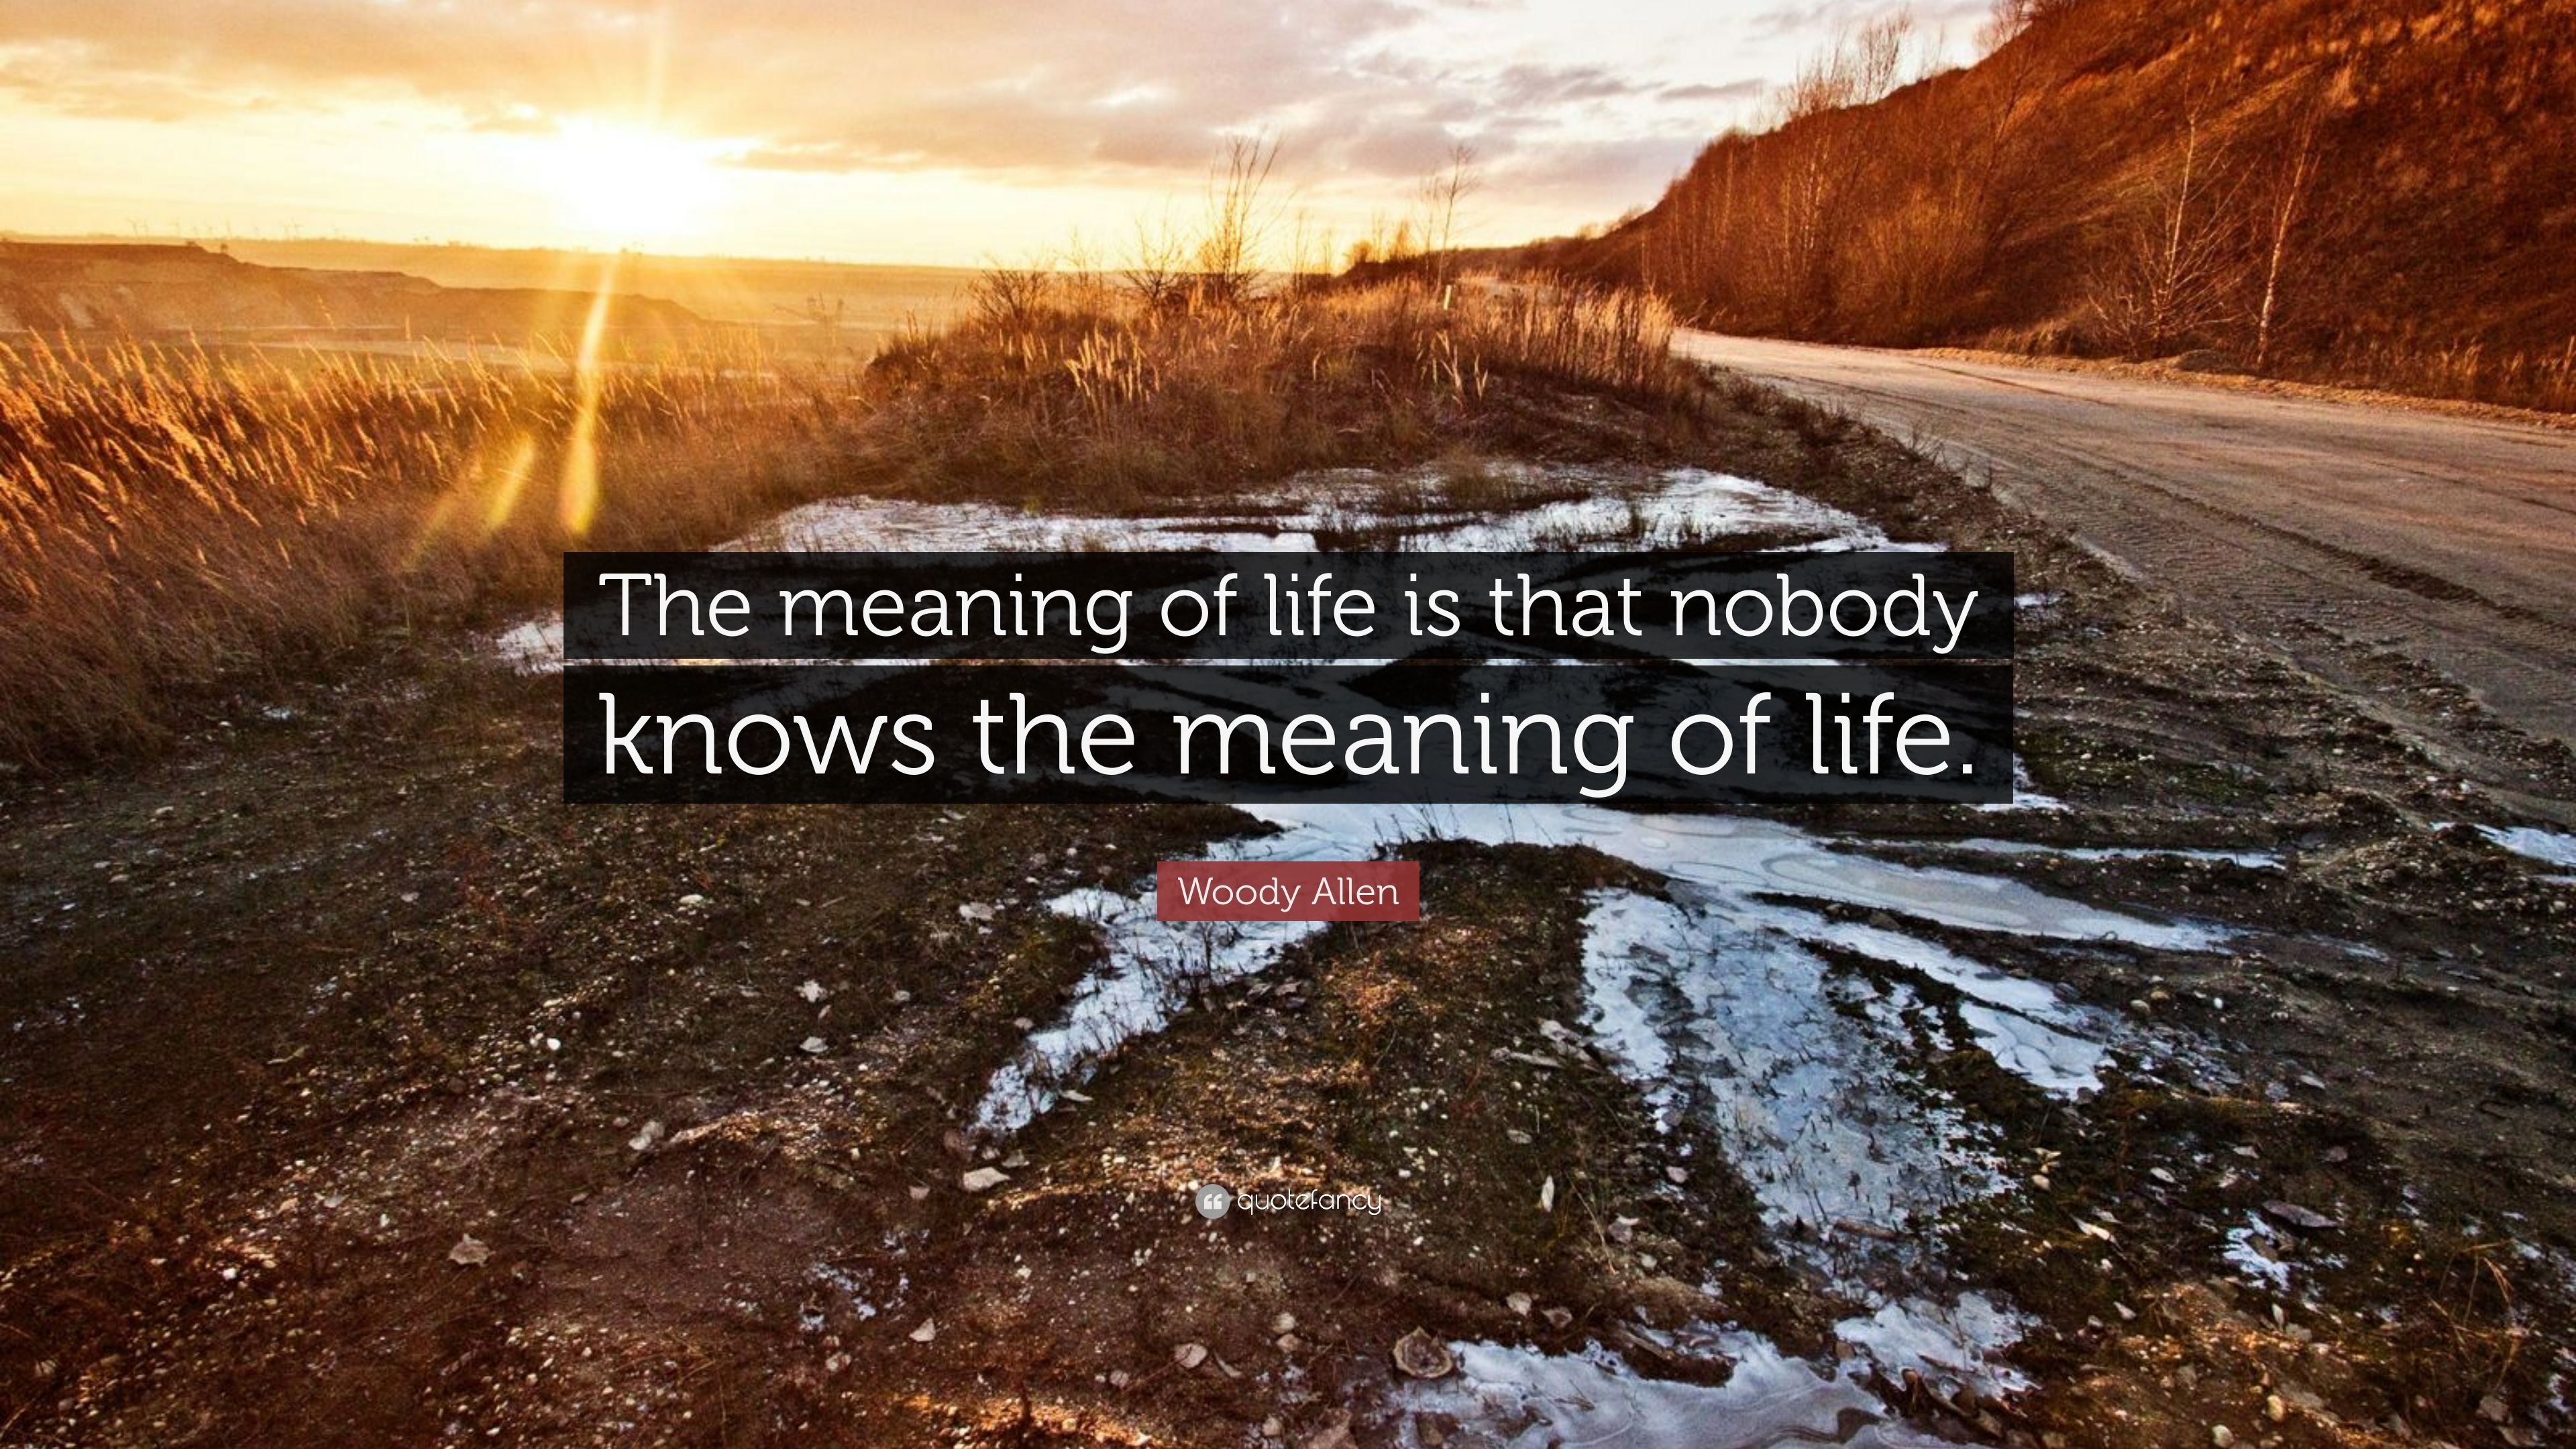 Woody Allen Quote: “The meaning of life is that nobody knows